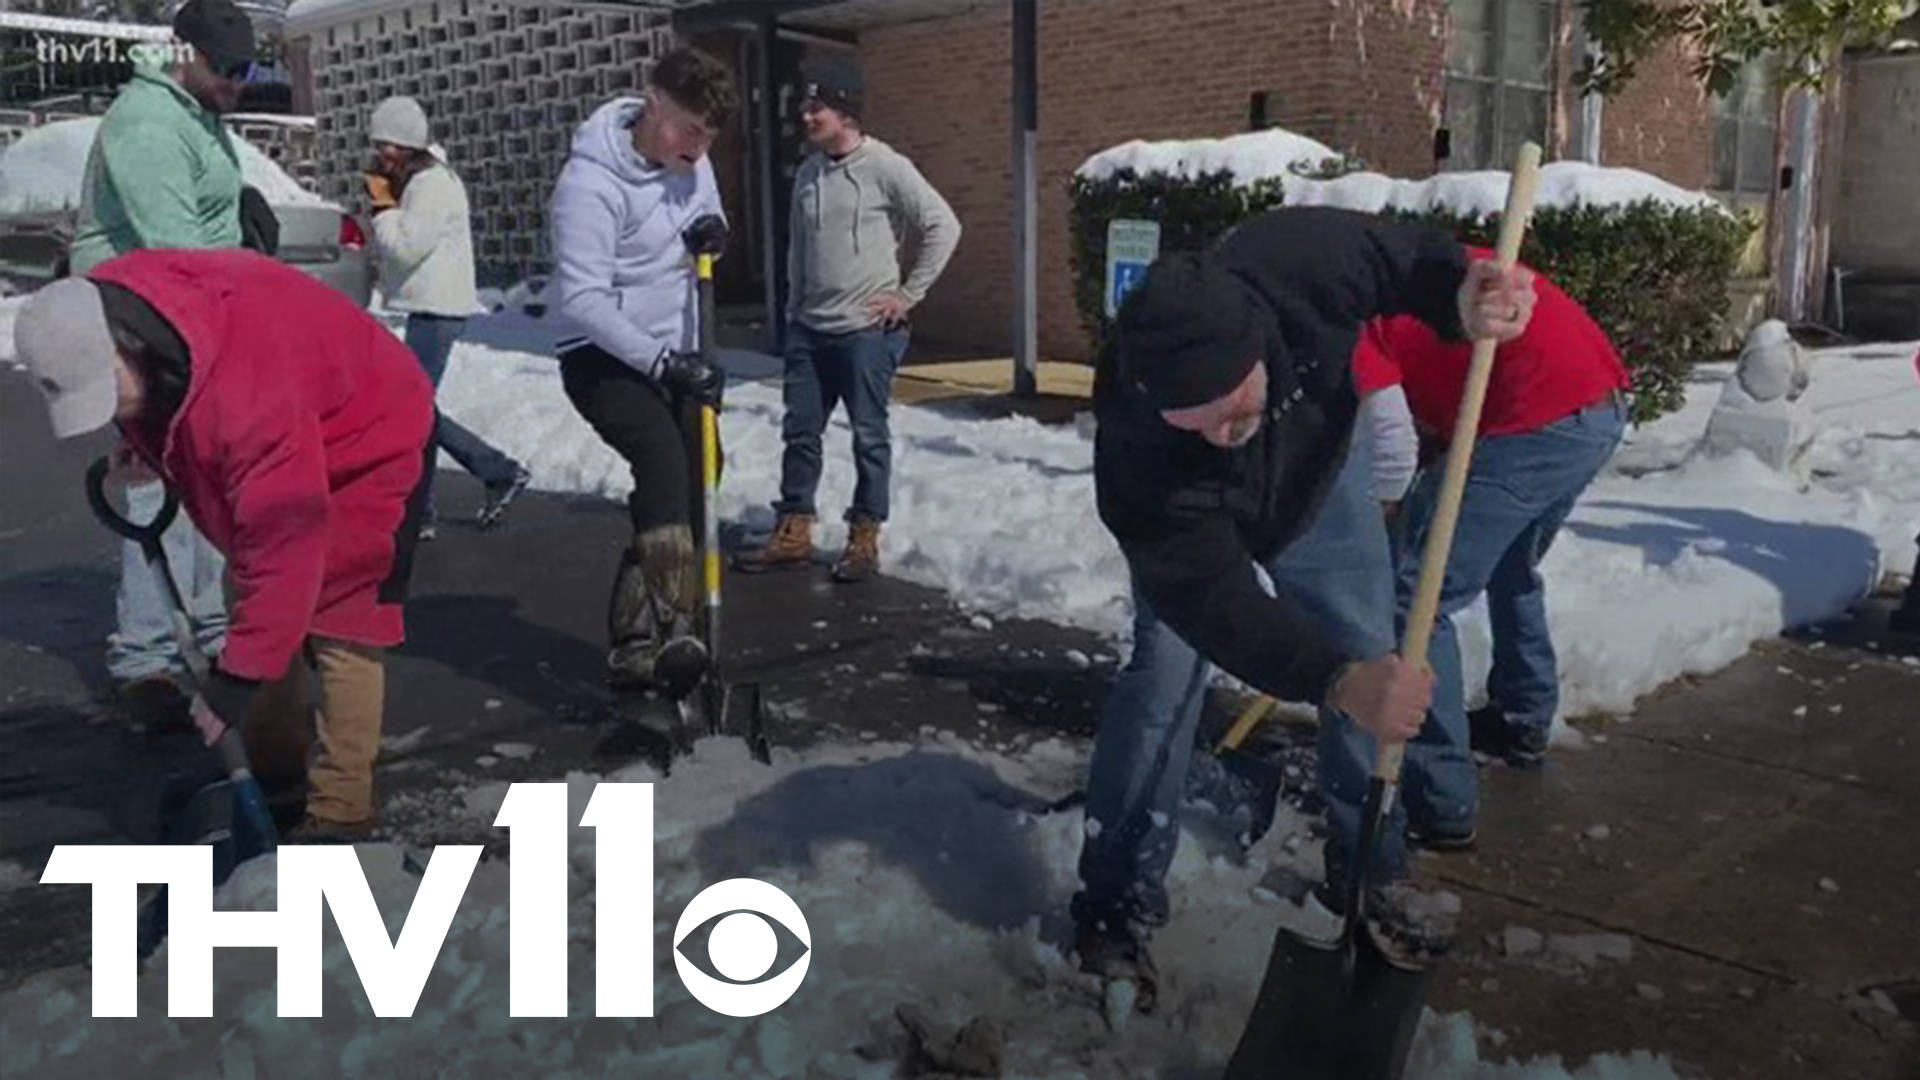 Volunteers from different groups and organizations began the clean up efforts for World Services for the Blind after pipes busted from freezing temperatures.